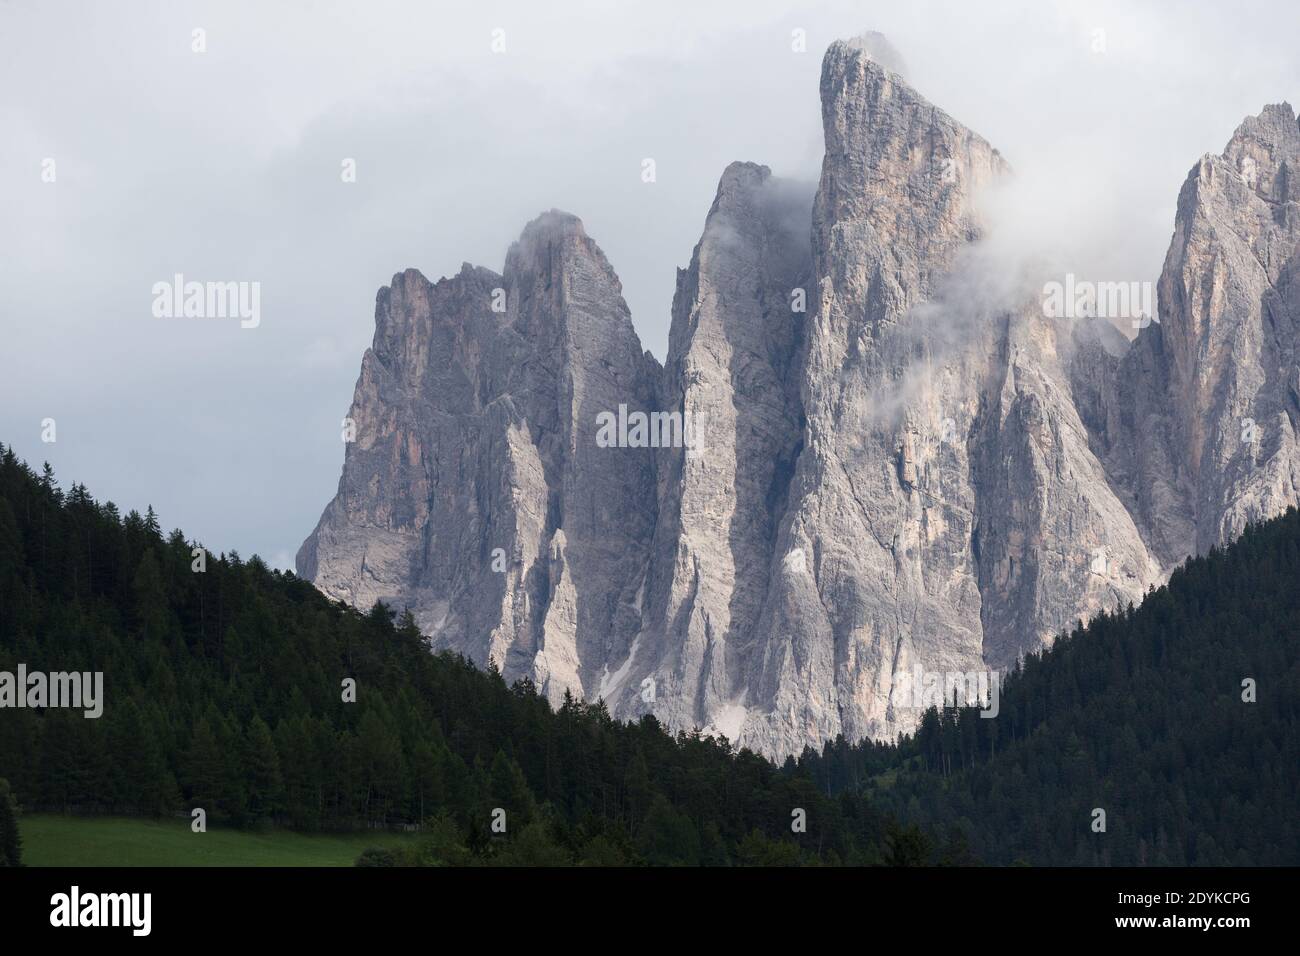 The Odle Mountain Peaks  of The Dolomites Stock Photo